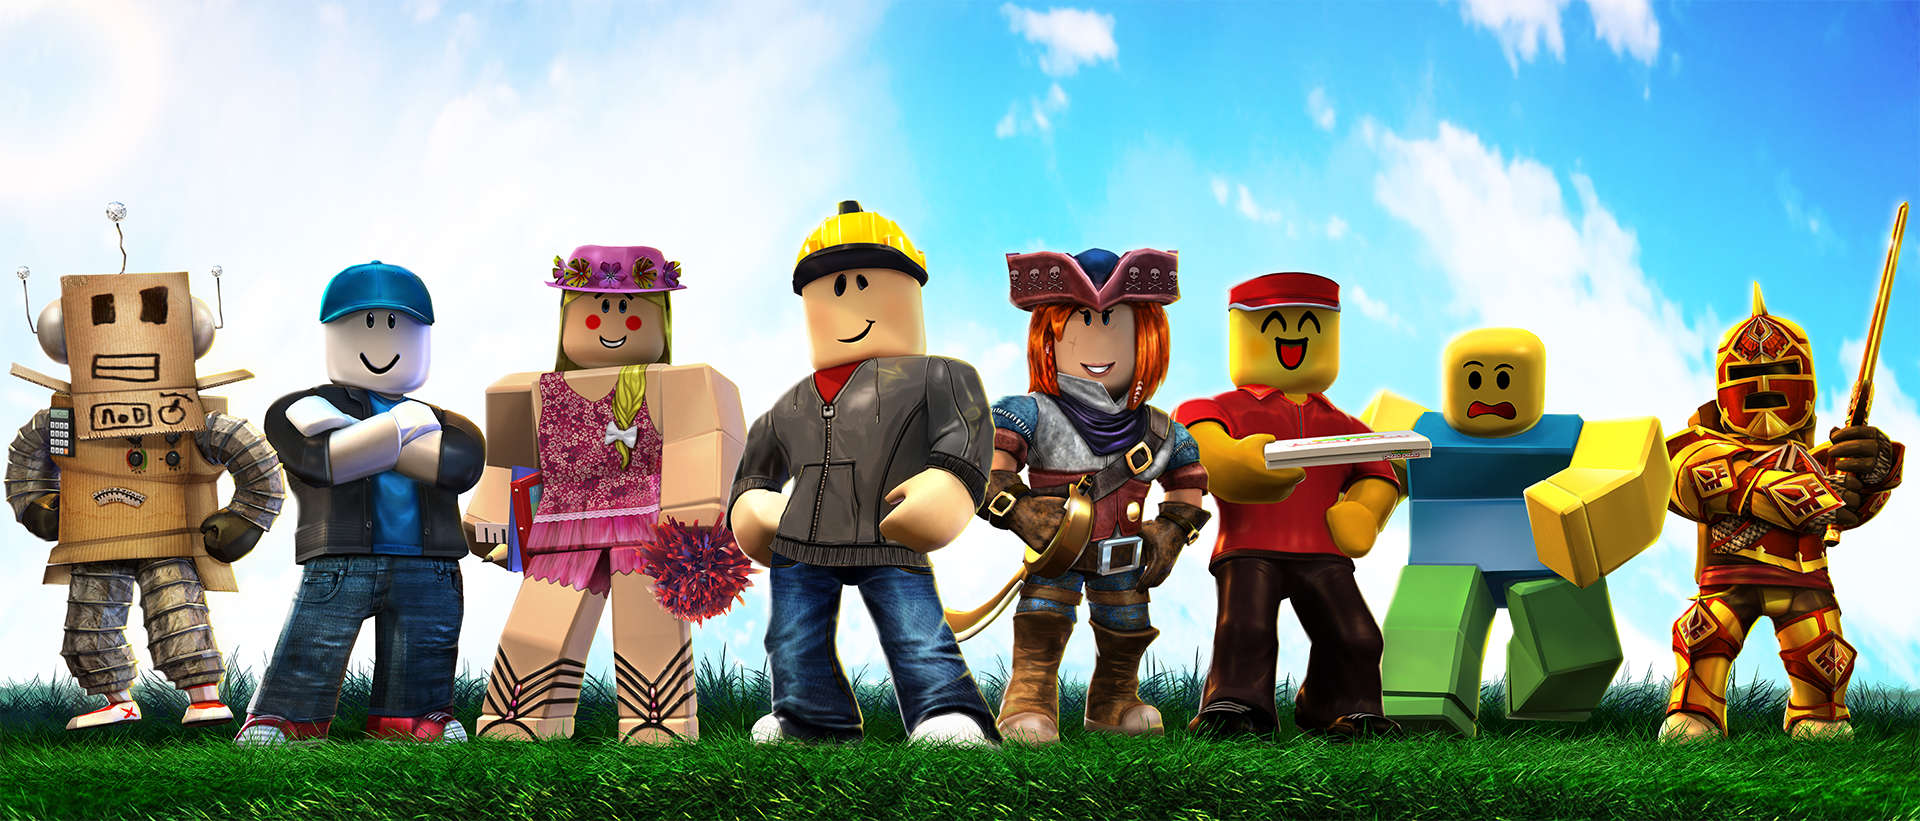 Roblox Raises 150 Million In Funding Is Now Reportedly Worth 2 5 Billion - roblox yahoo finance